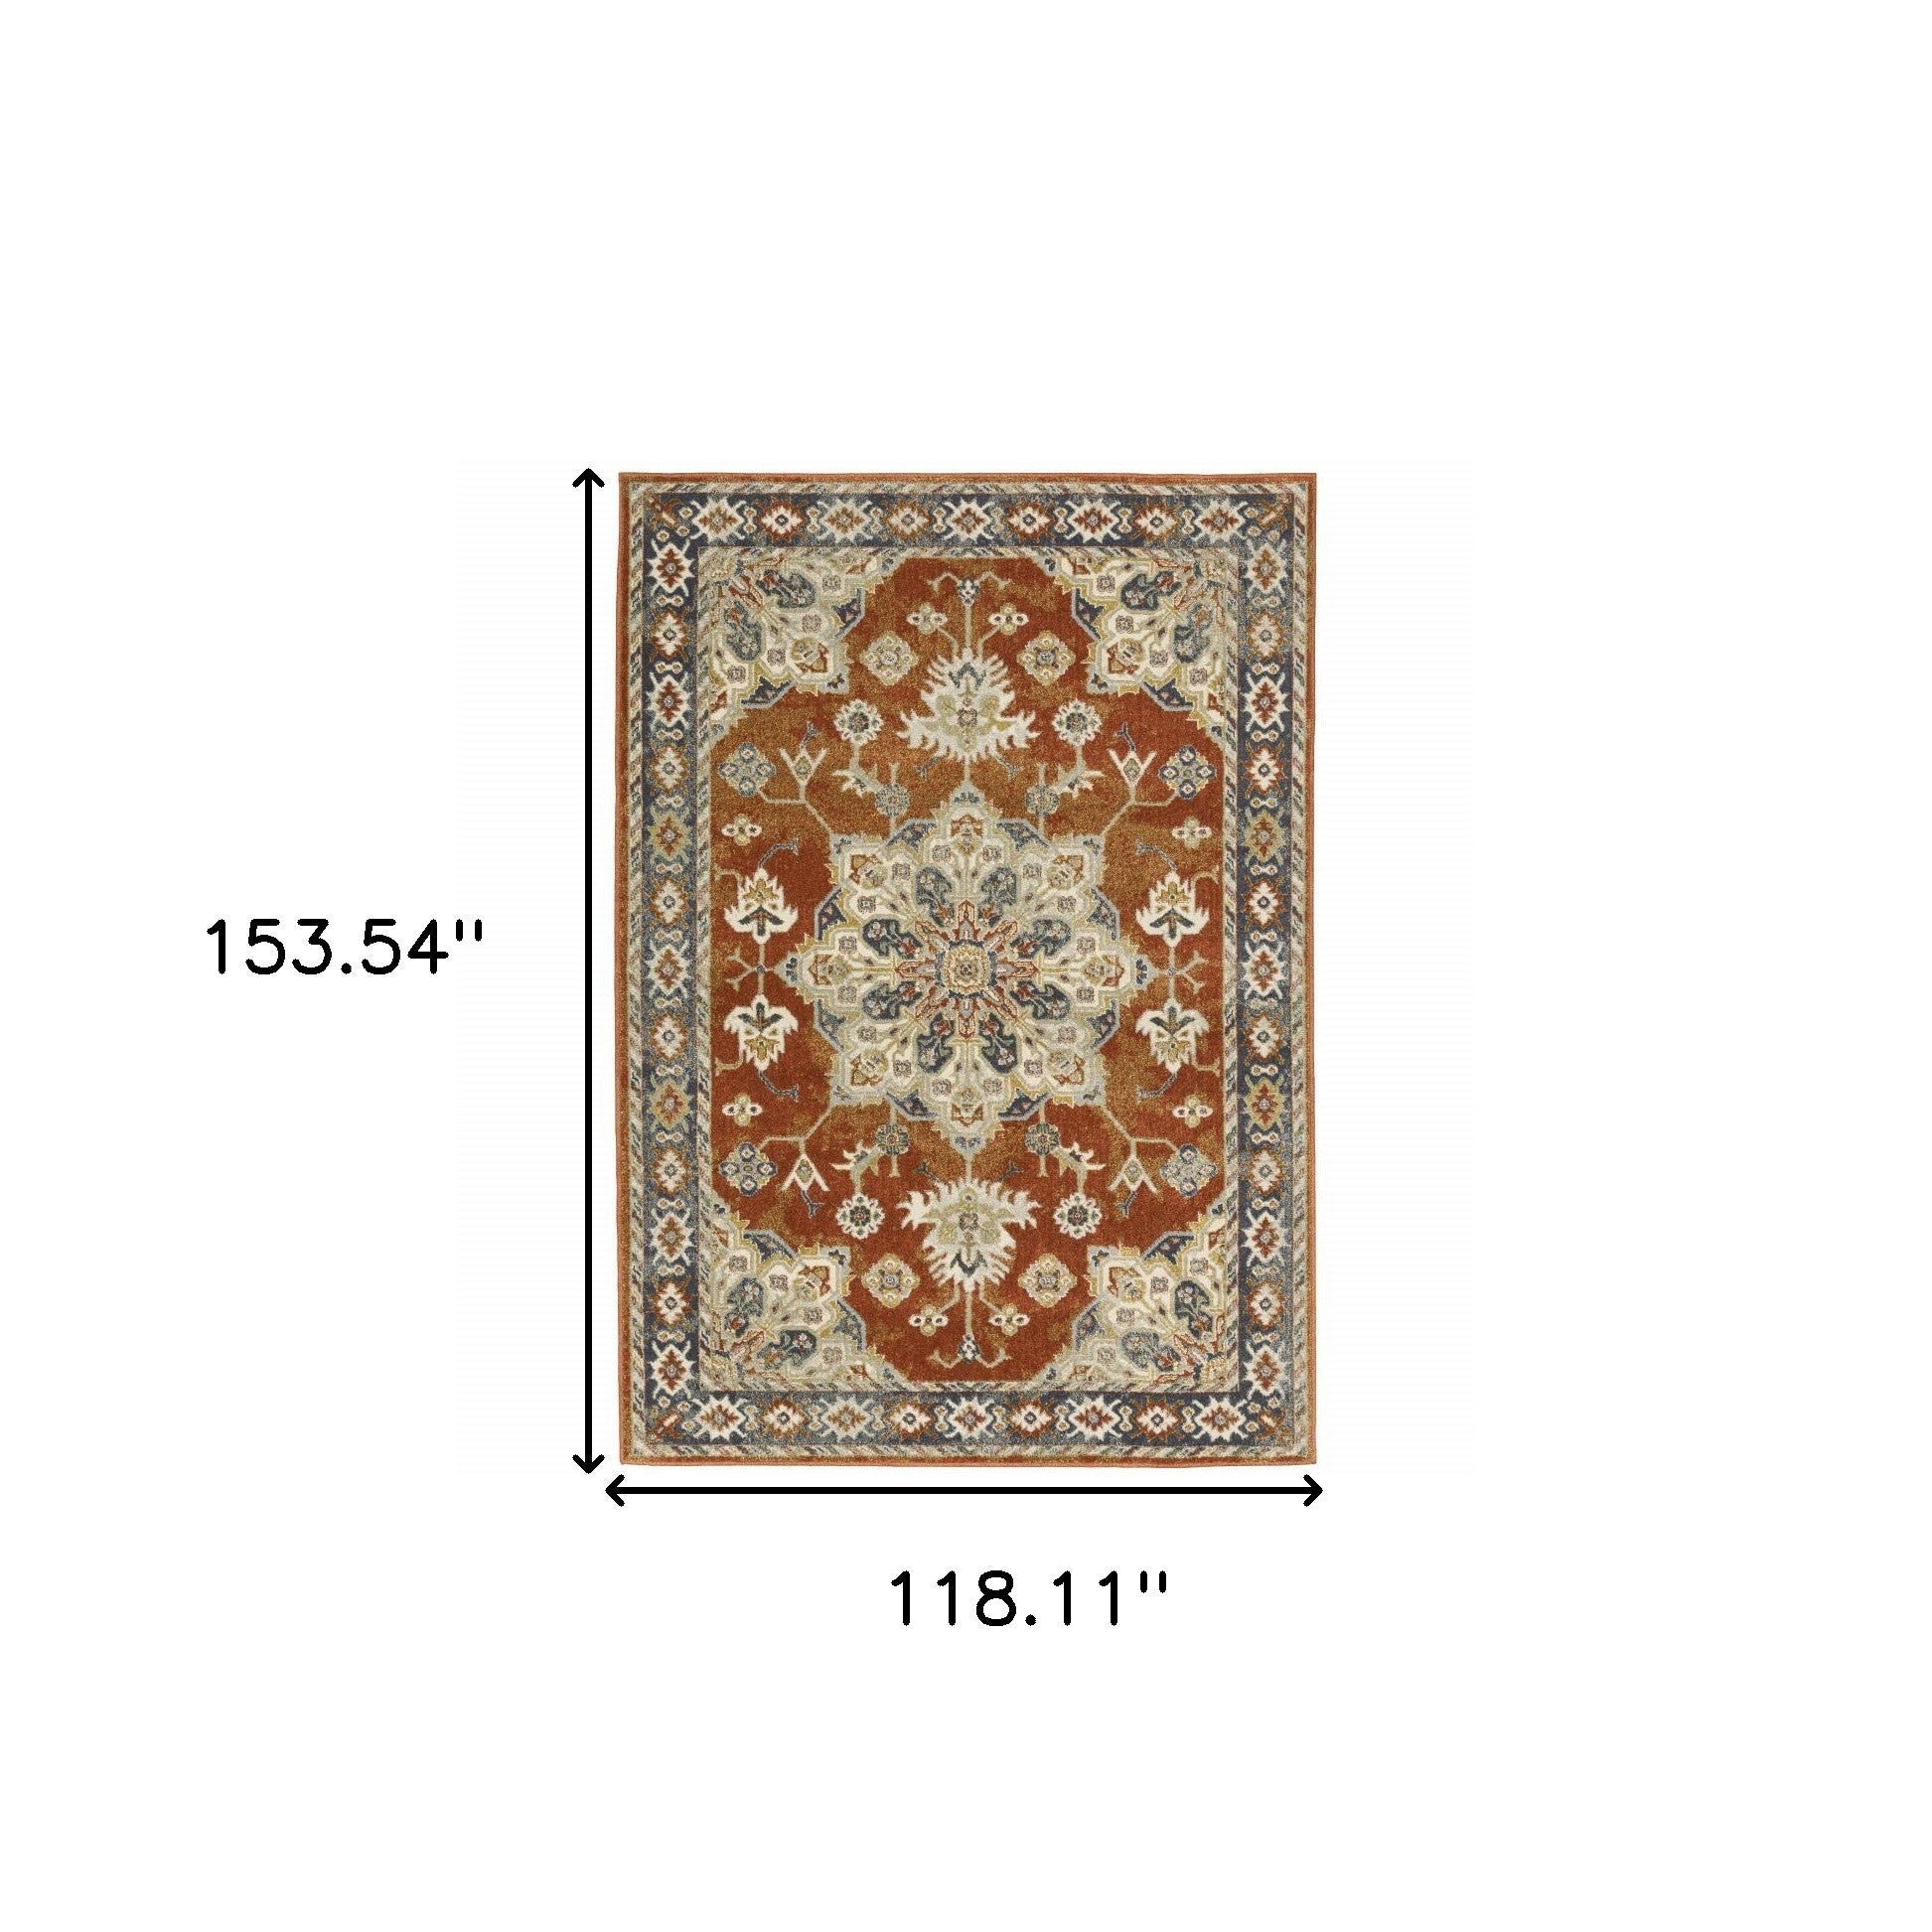 10' X 13' Rust Beige Teal Blue And Gold Oriental Power Loom Stain Resistant Area Rug